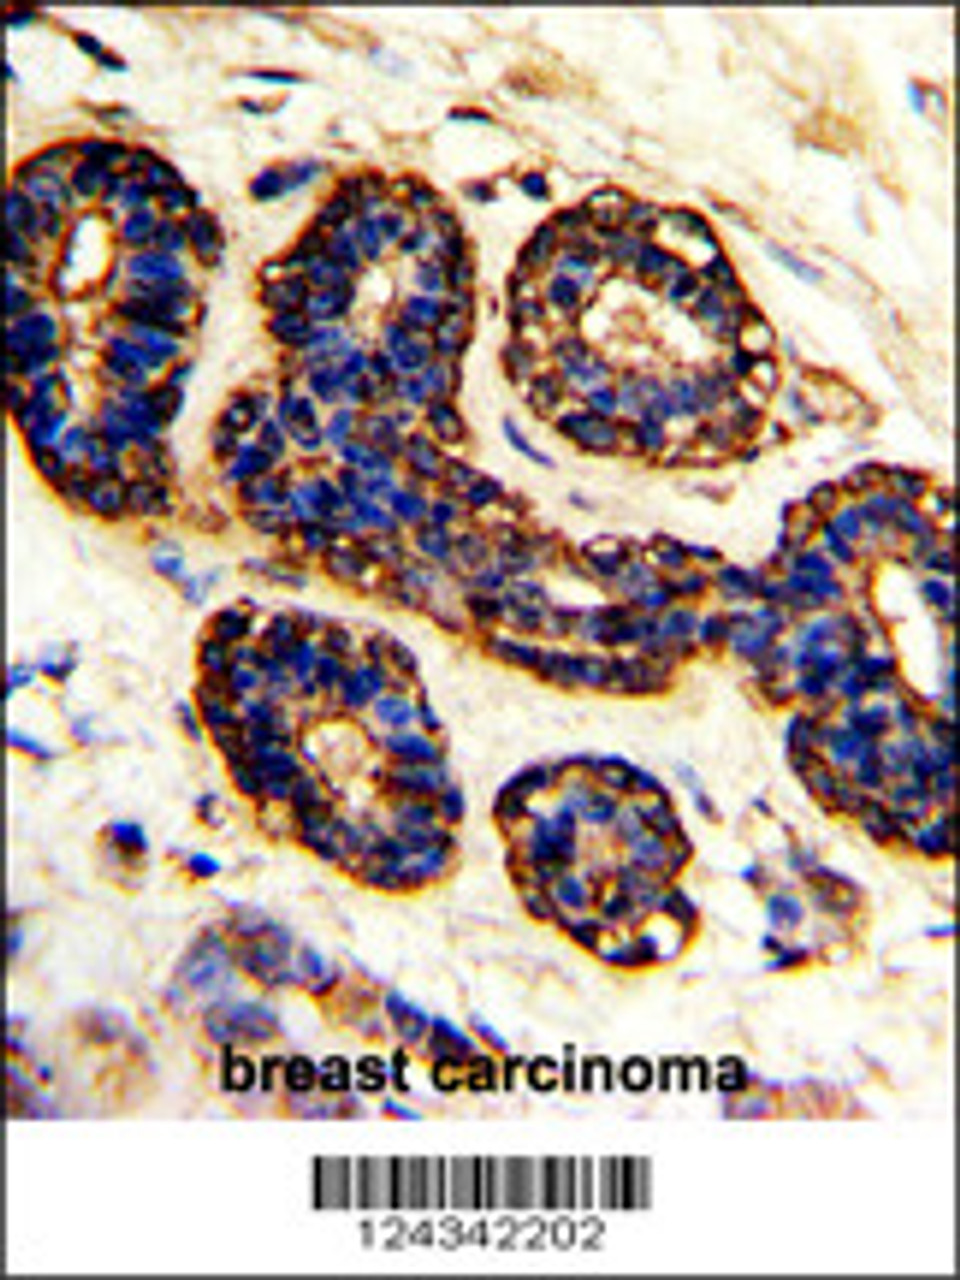 Formalin-fixed and paraffin-embedded human breast carcinoma with BEST2 Antibody, which was peroxidase-conjugated to the secondary antibody, followed by DAB staining.